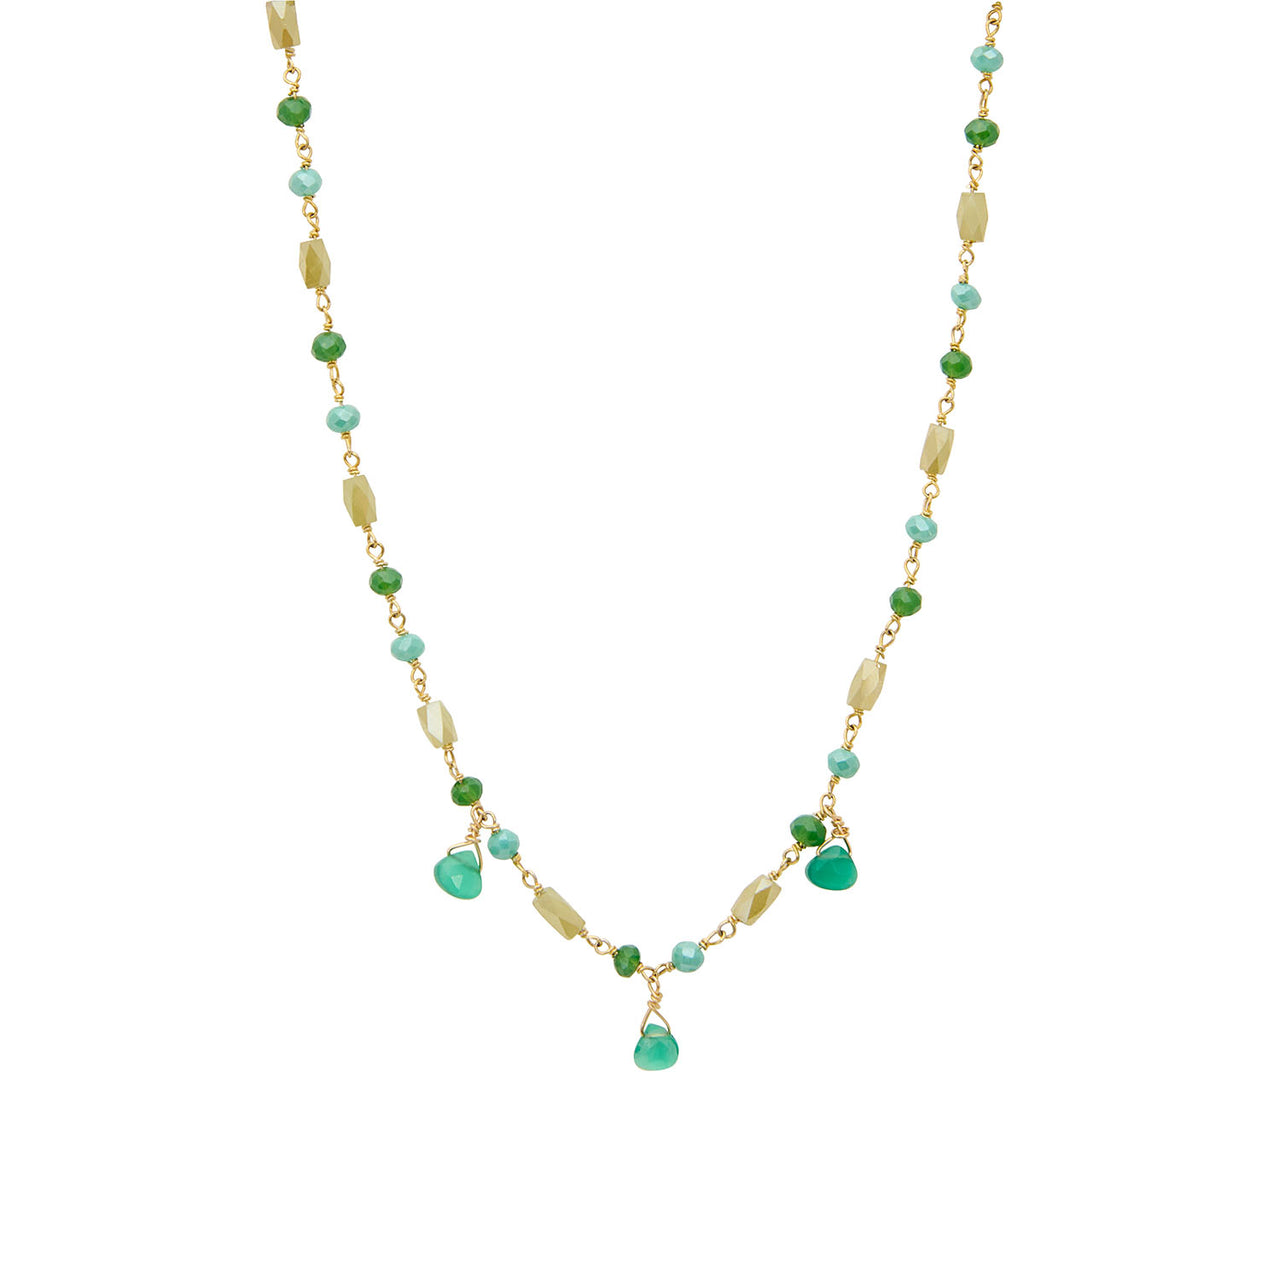 GREEN ANDROMACHE NECKLACE